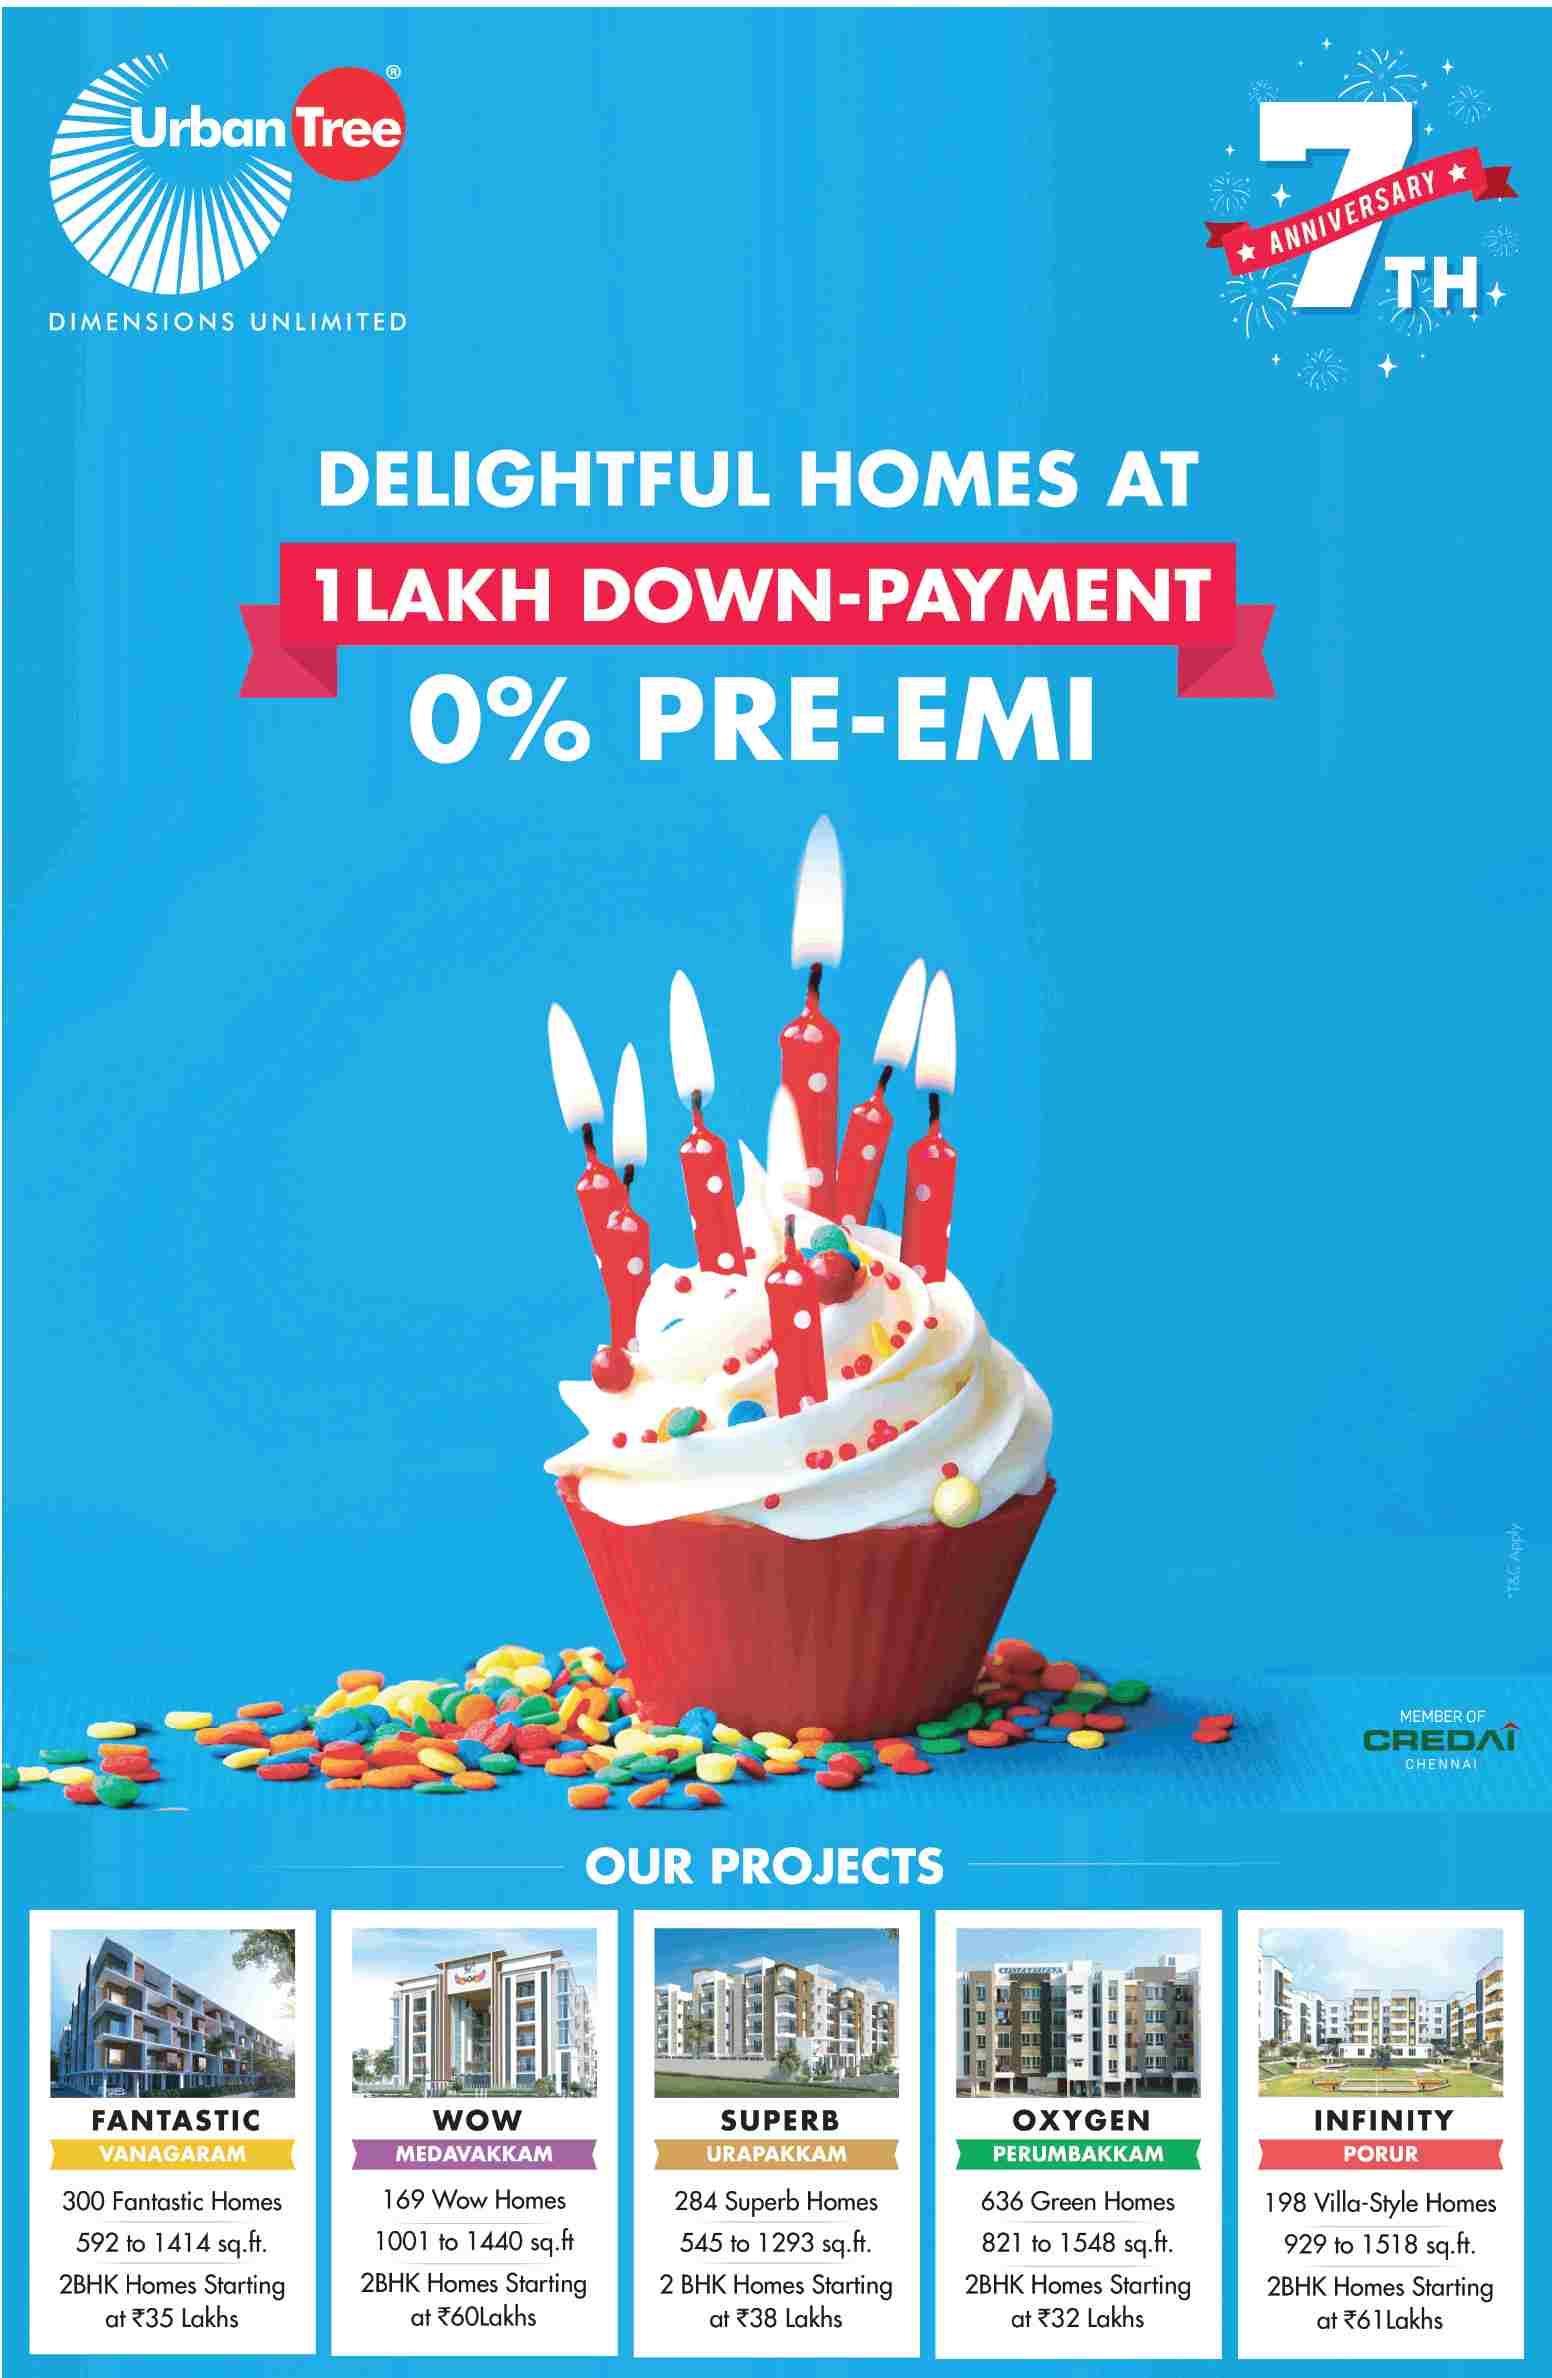 Book delightful Urban Tree homes at Rs. 1 Lakh down-payment with 0% pre-EMI Update